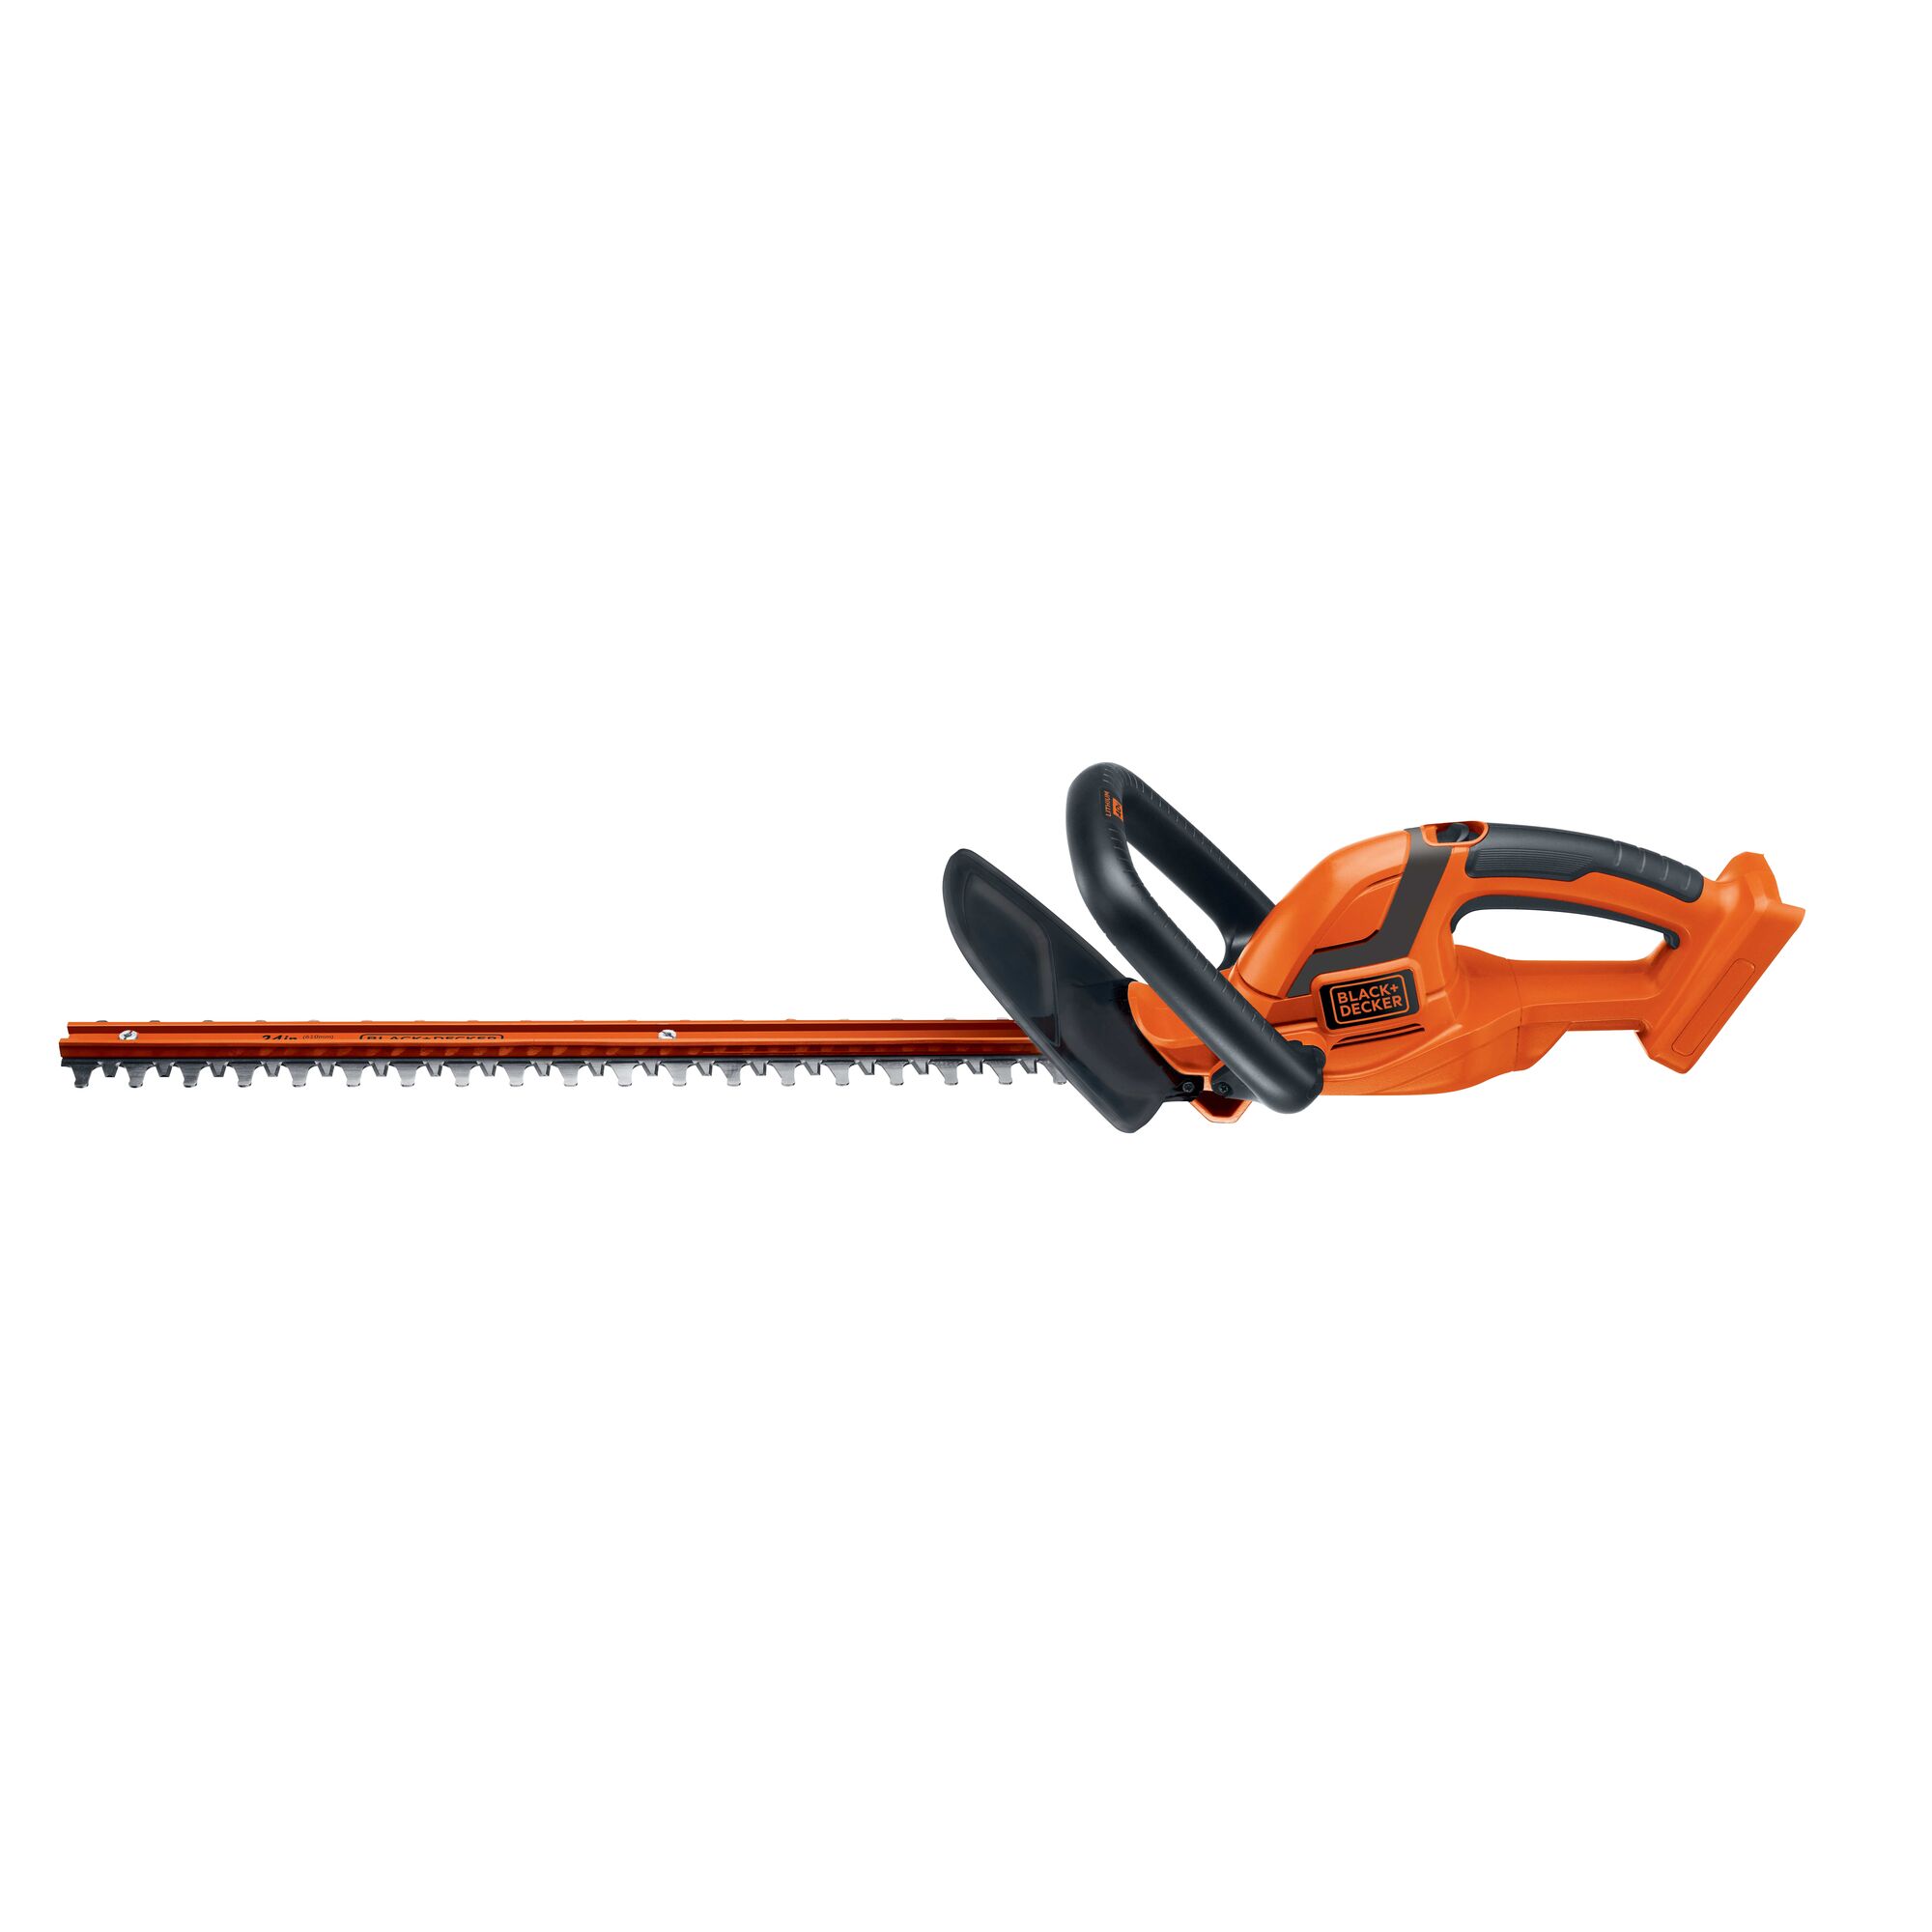 40 Volt Max Cordless Hedge Trimmer on white background.